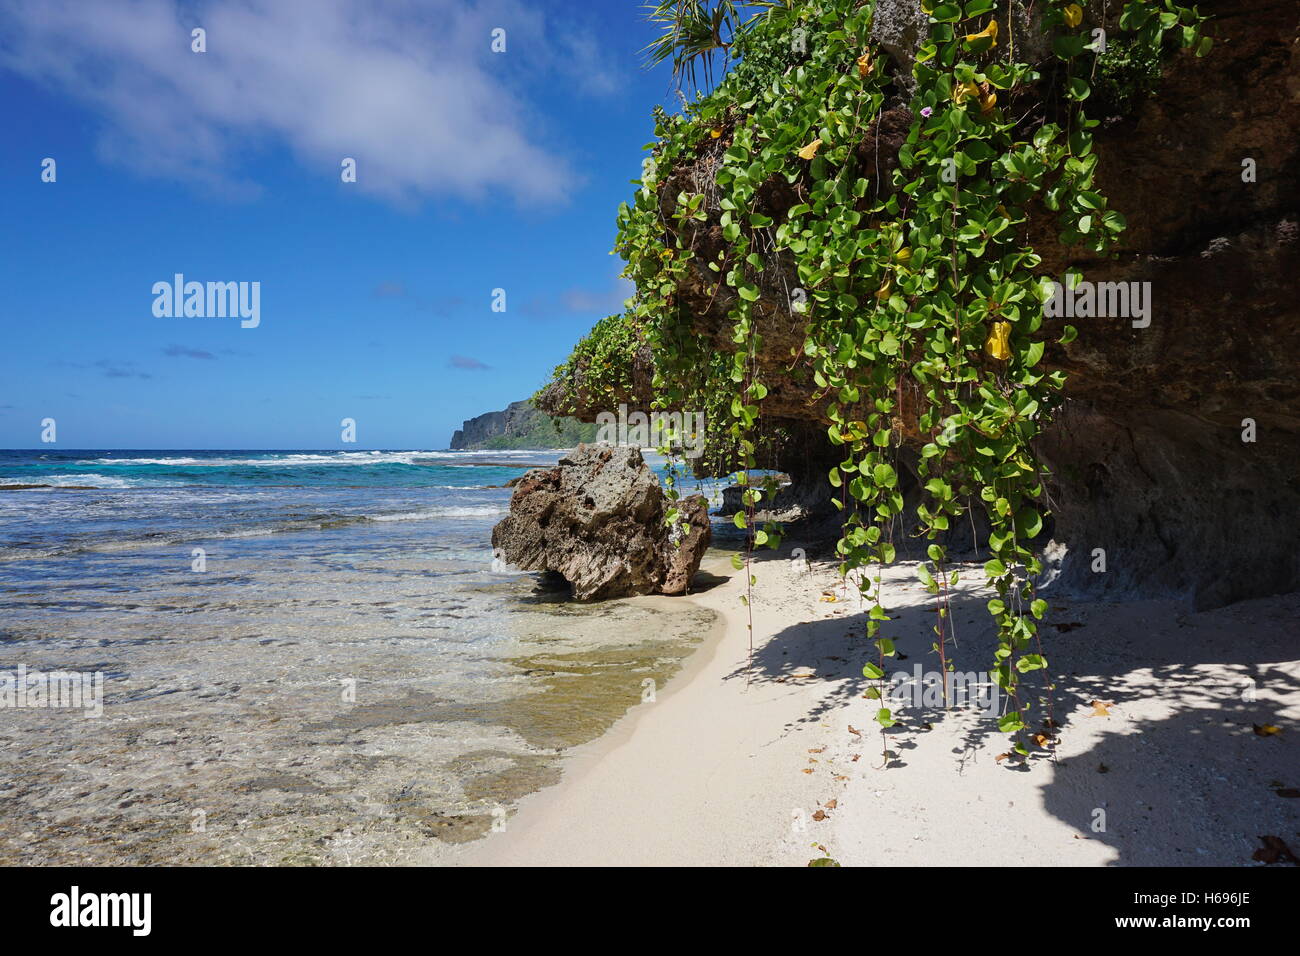 Sea shore with creeping plant hang down from the rocks, Rurutu island, south Pacific ocean, Austral, French Polynesia Stock Photo